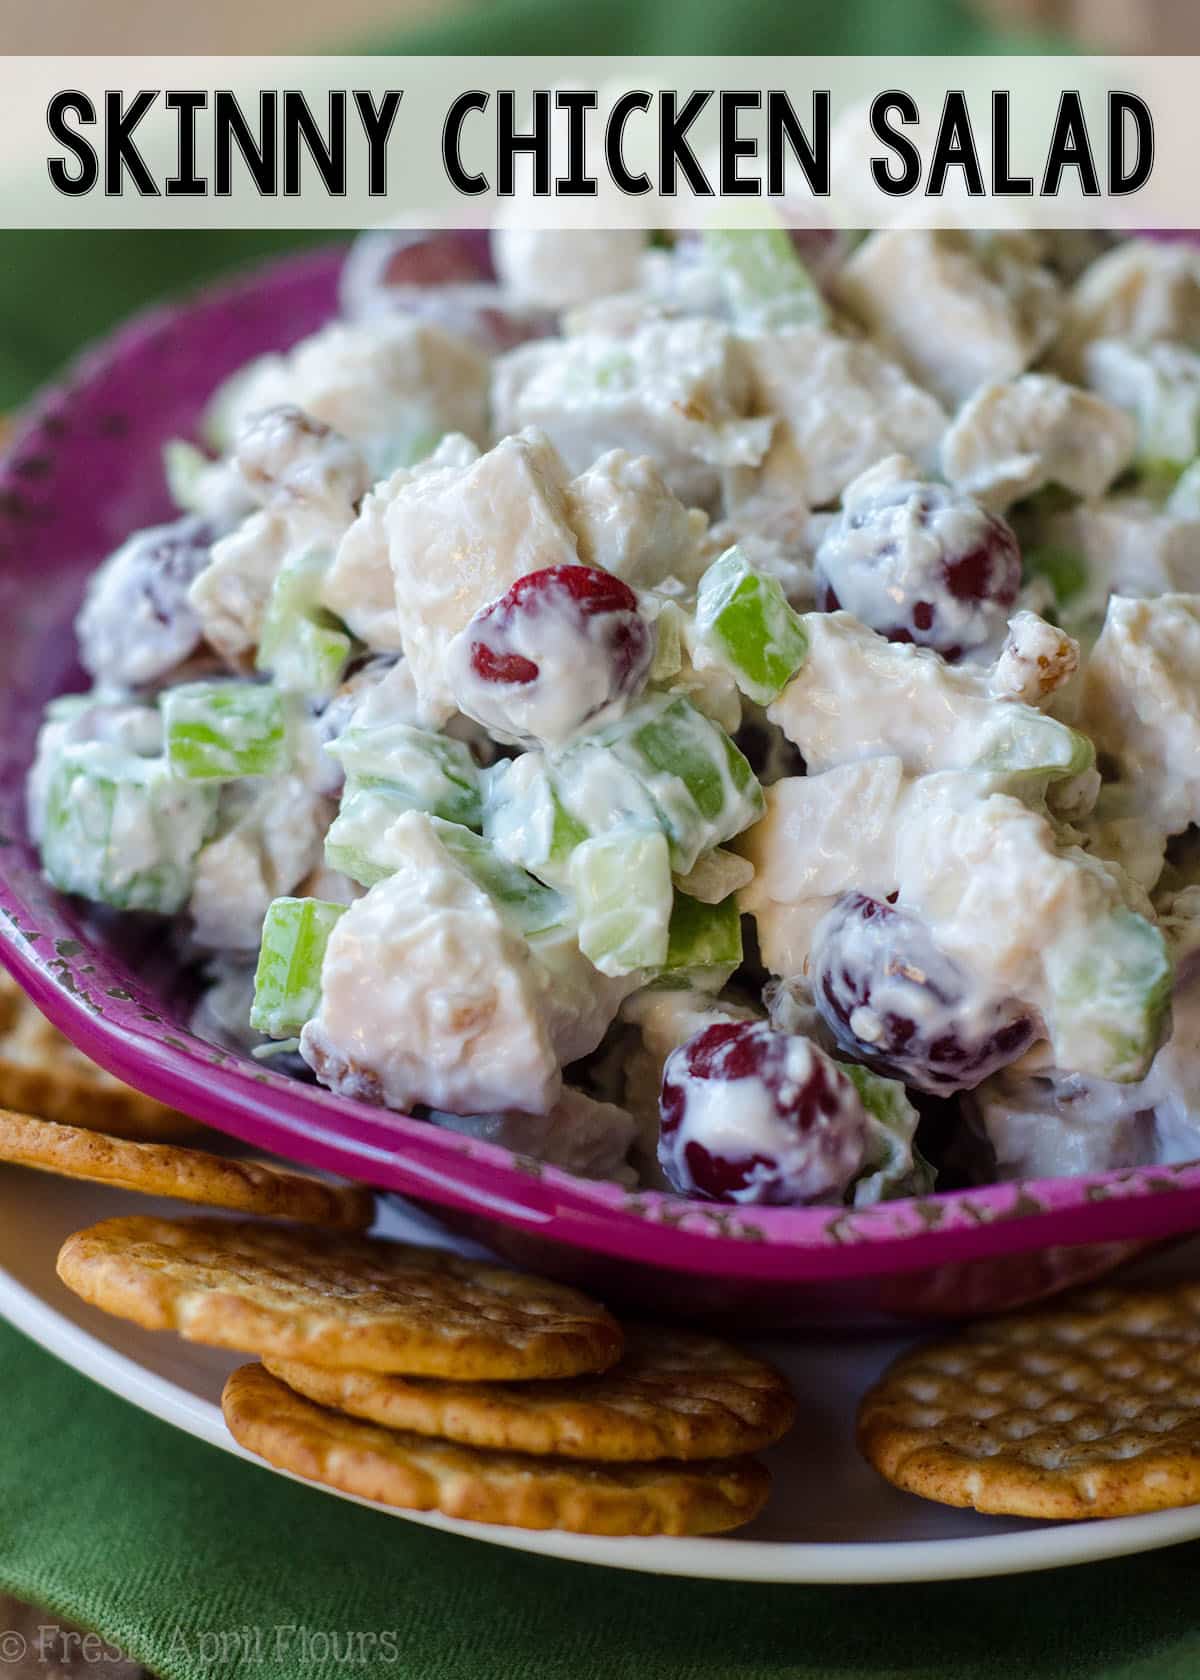 Traditionally calorie-laden chicken salad gets a healthy upgrade using Greek yogurt and spices. Celery, grapes, and walnuts add the perfect crunch and flavors to insure you won't miss the "real" thing! via @frshaprilflours